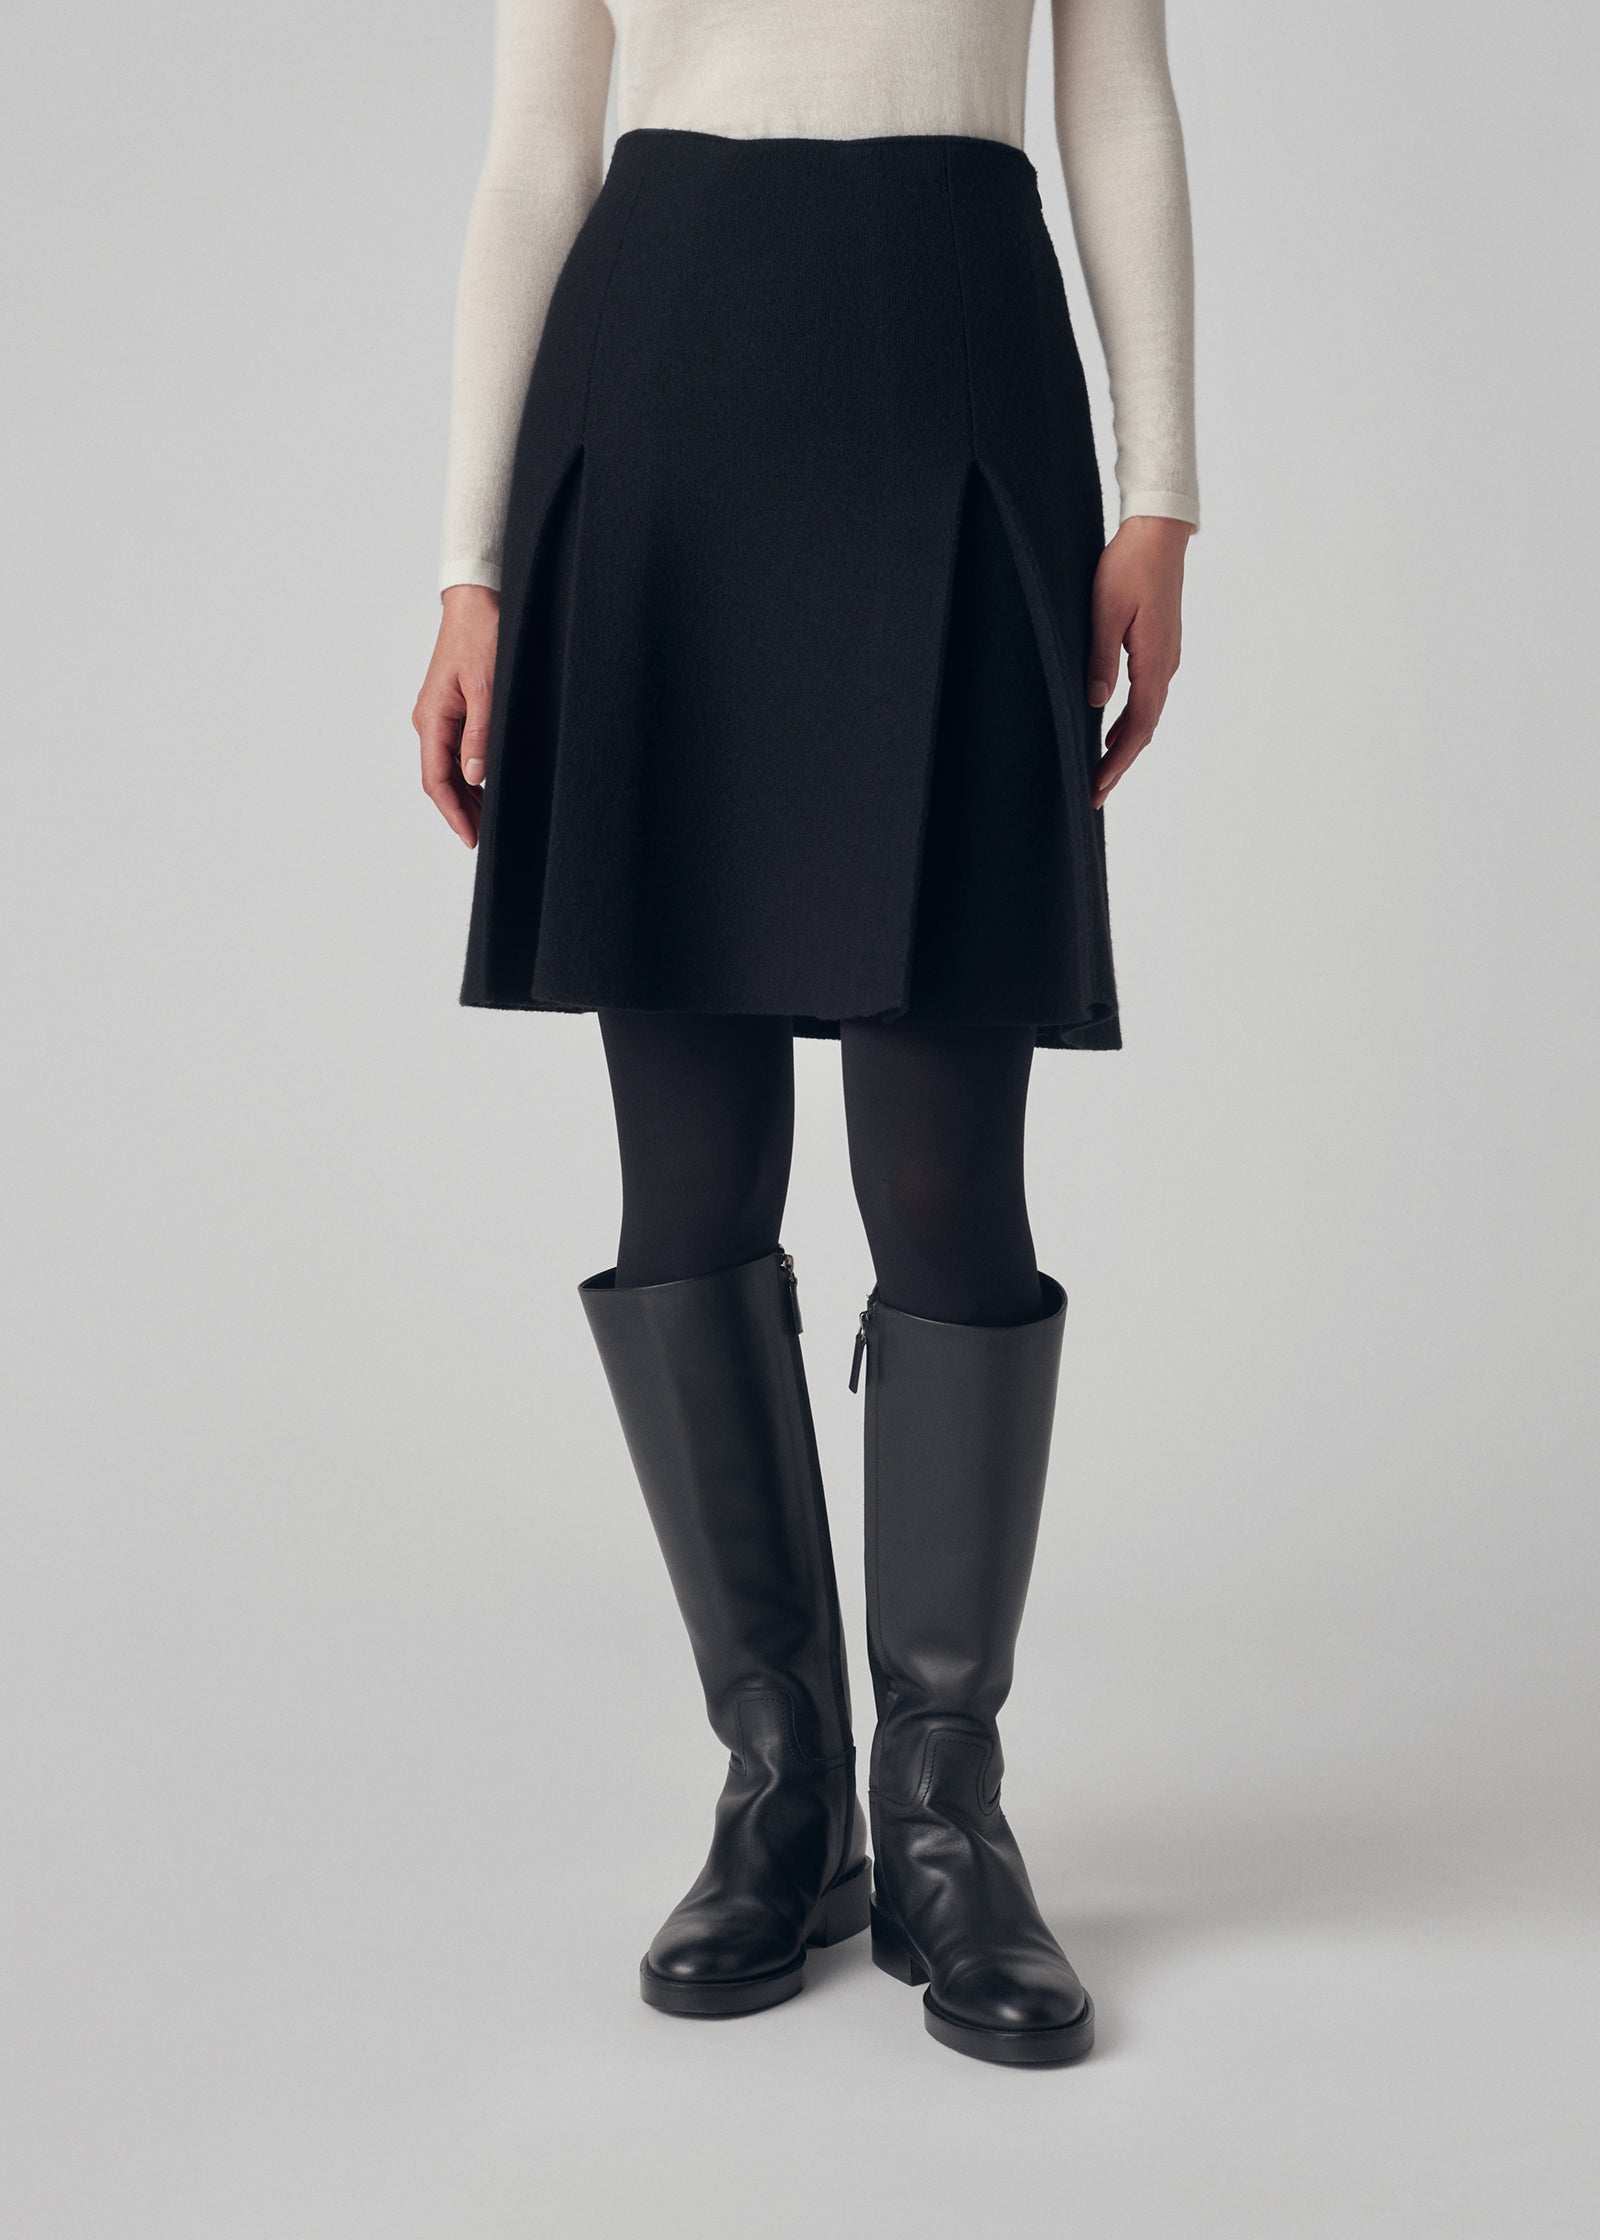 Compact Knit Skirt in Merino Wool - Black - CO Collections